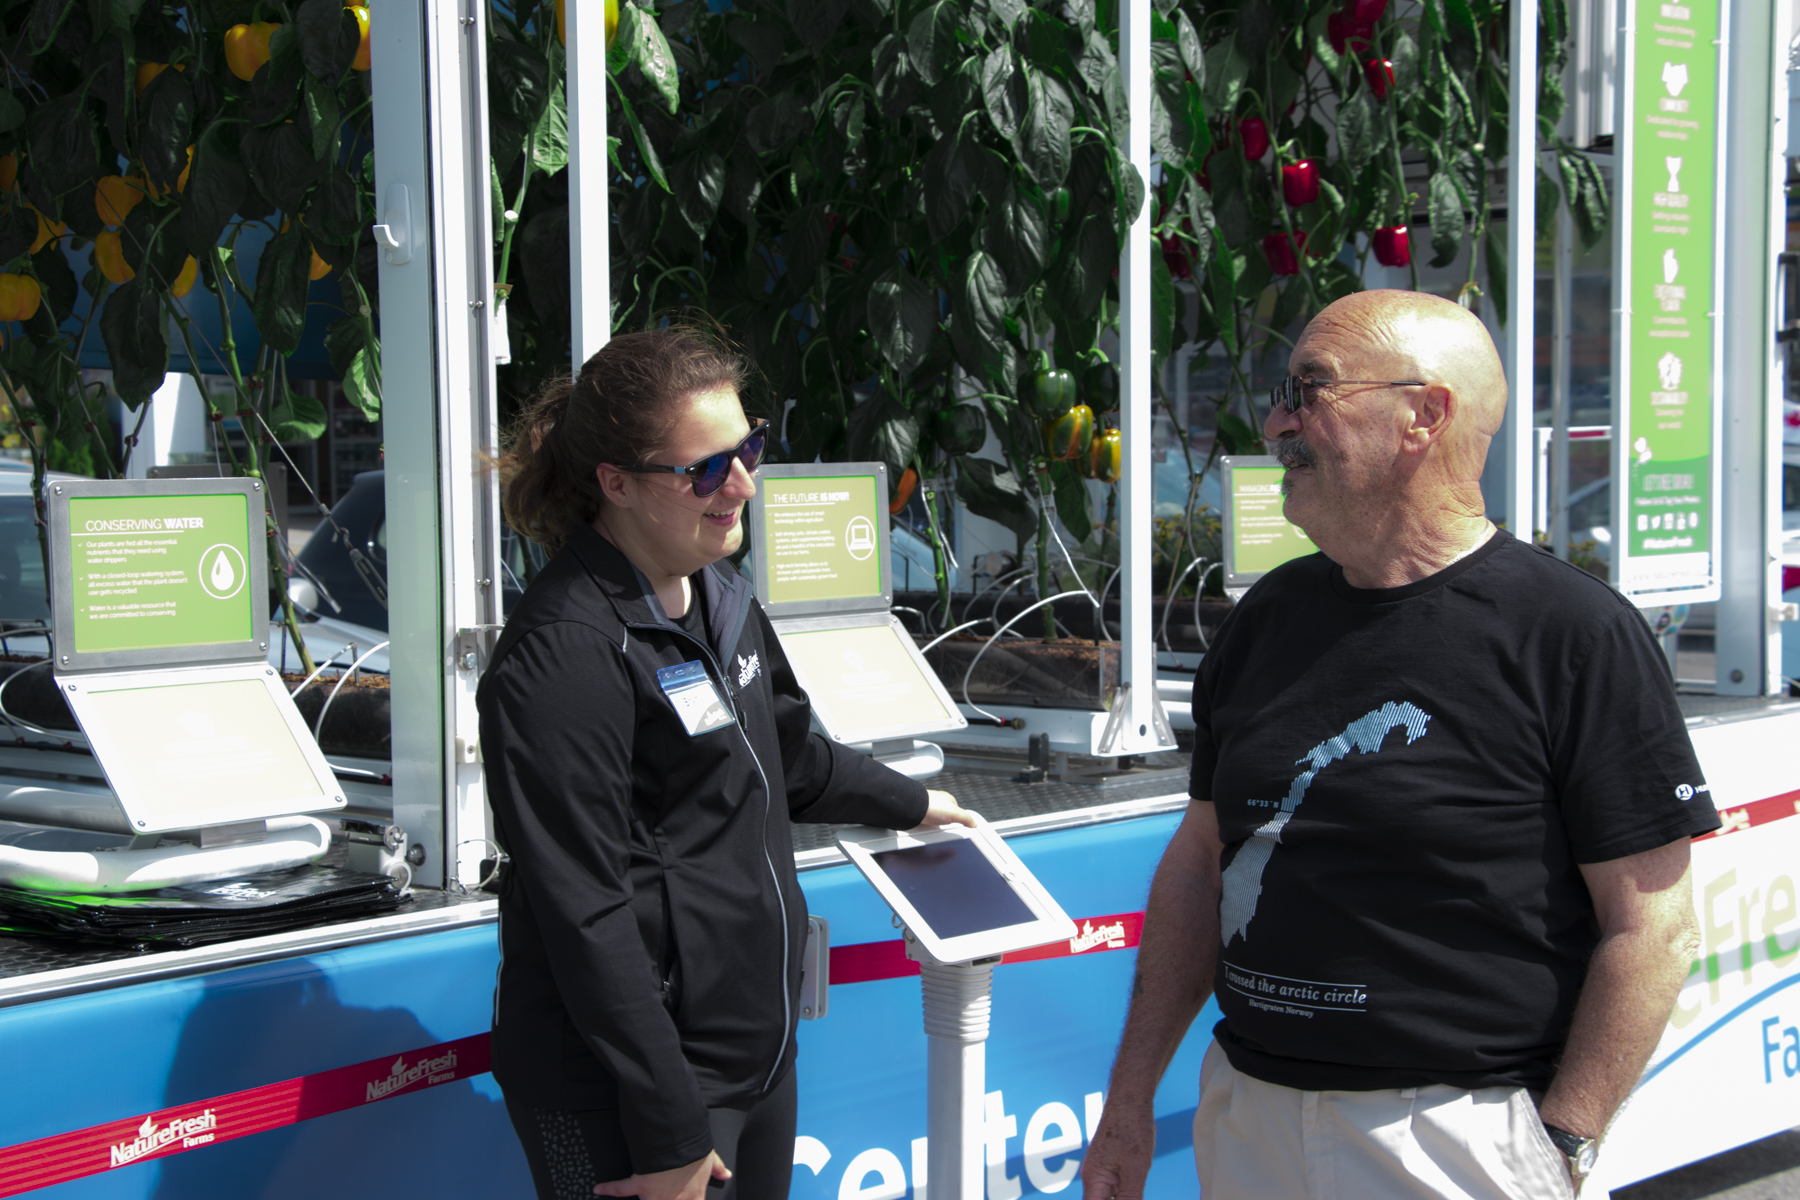 Bryn speaking with a consumer at the GEC